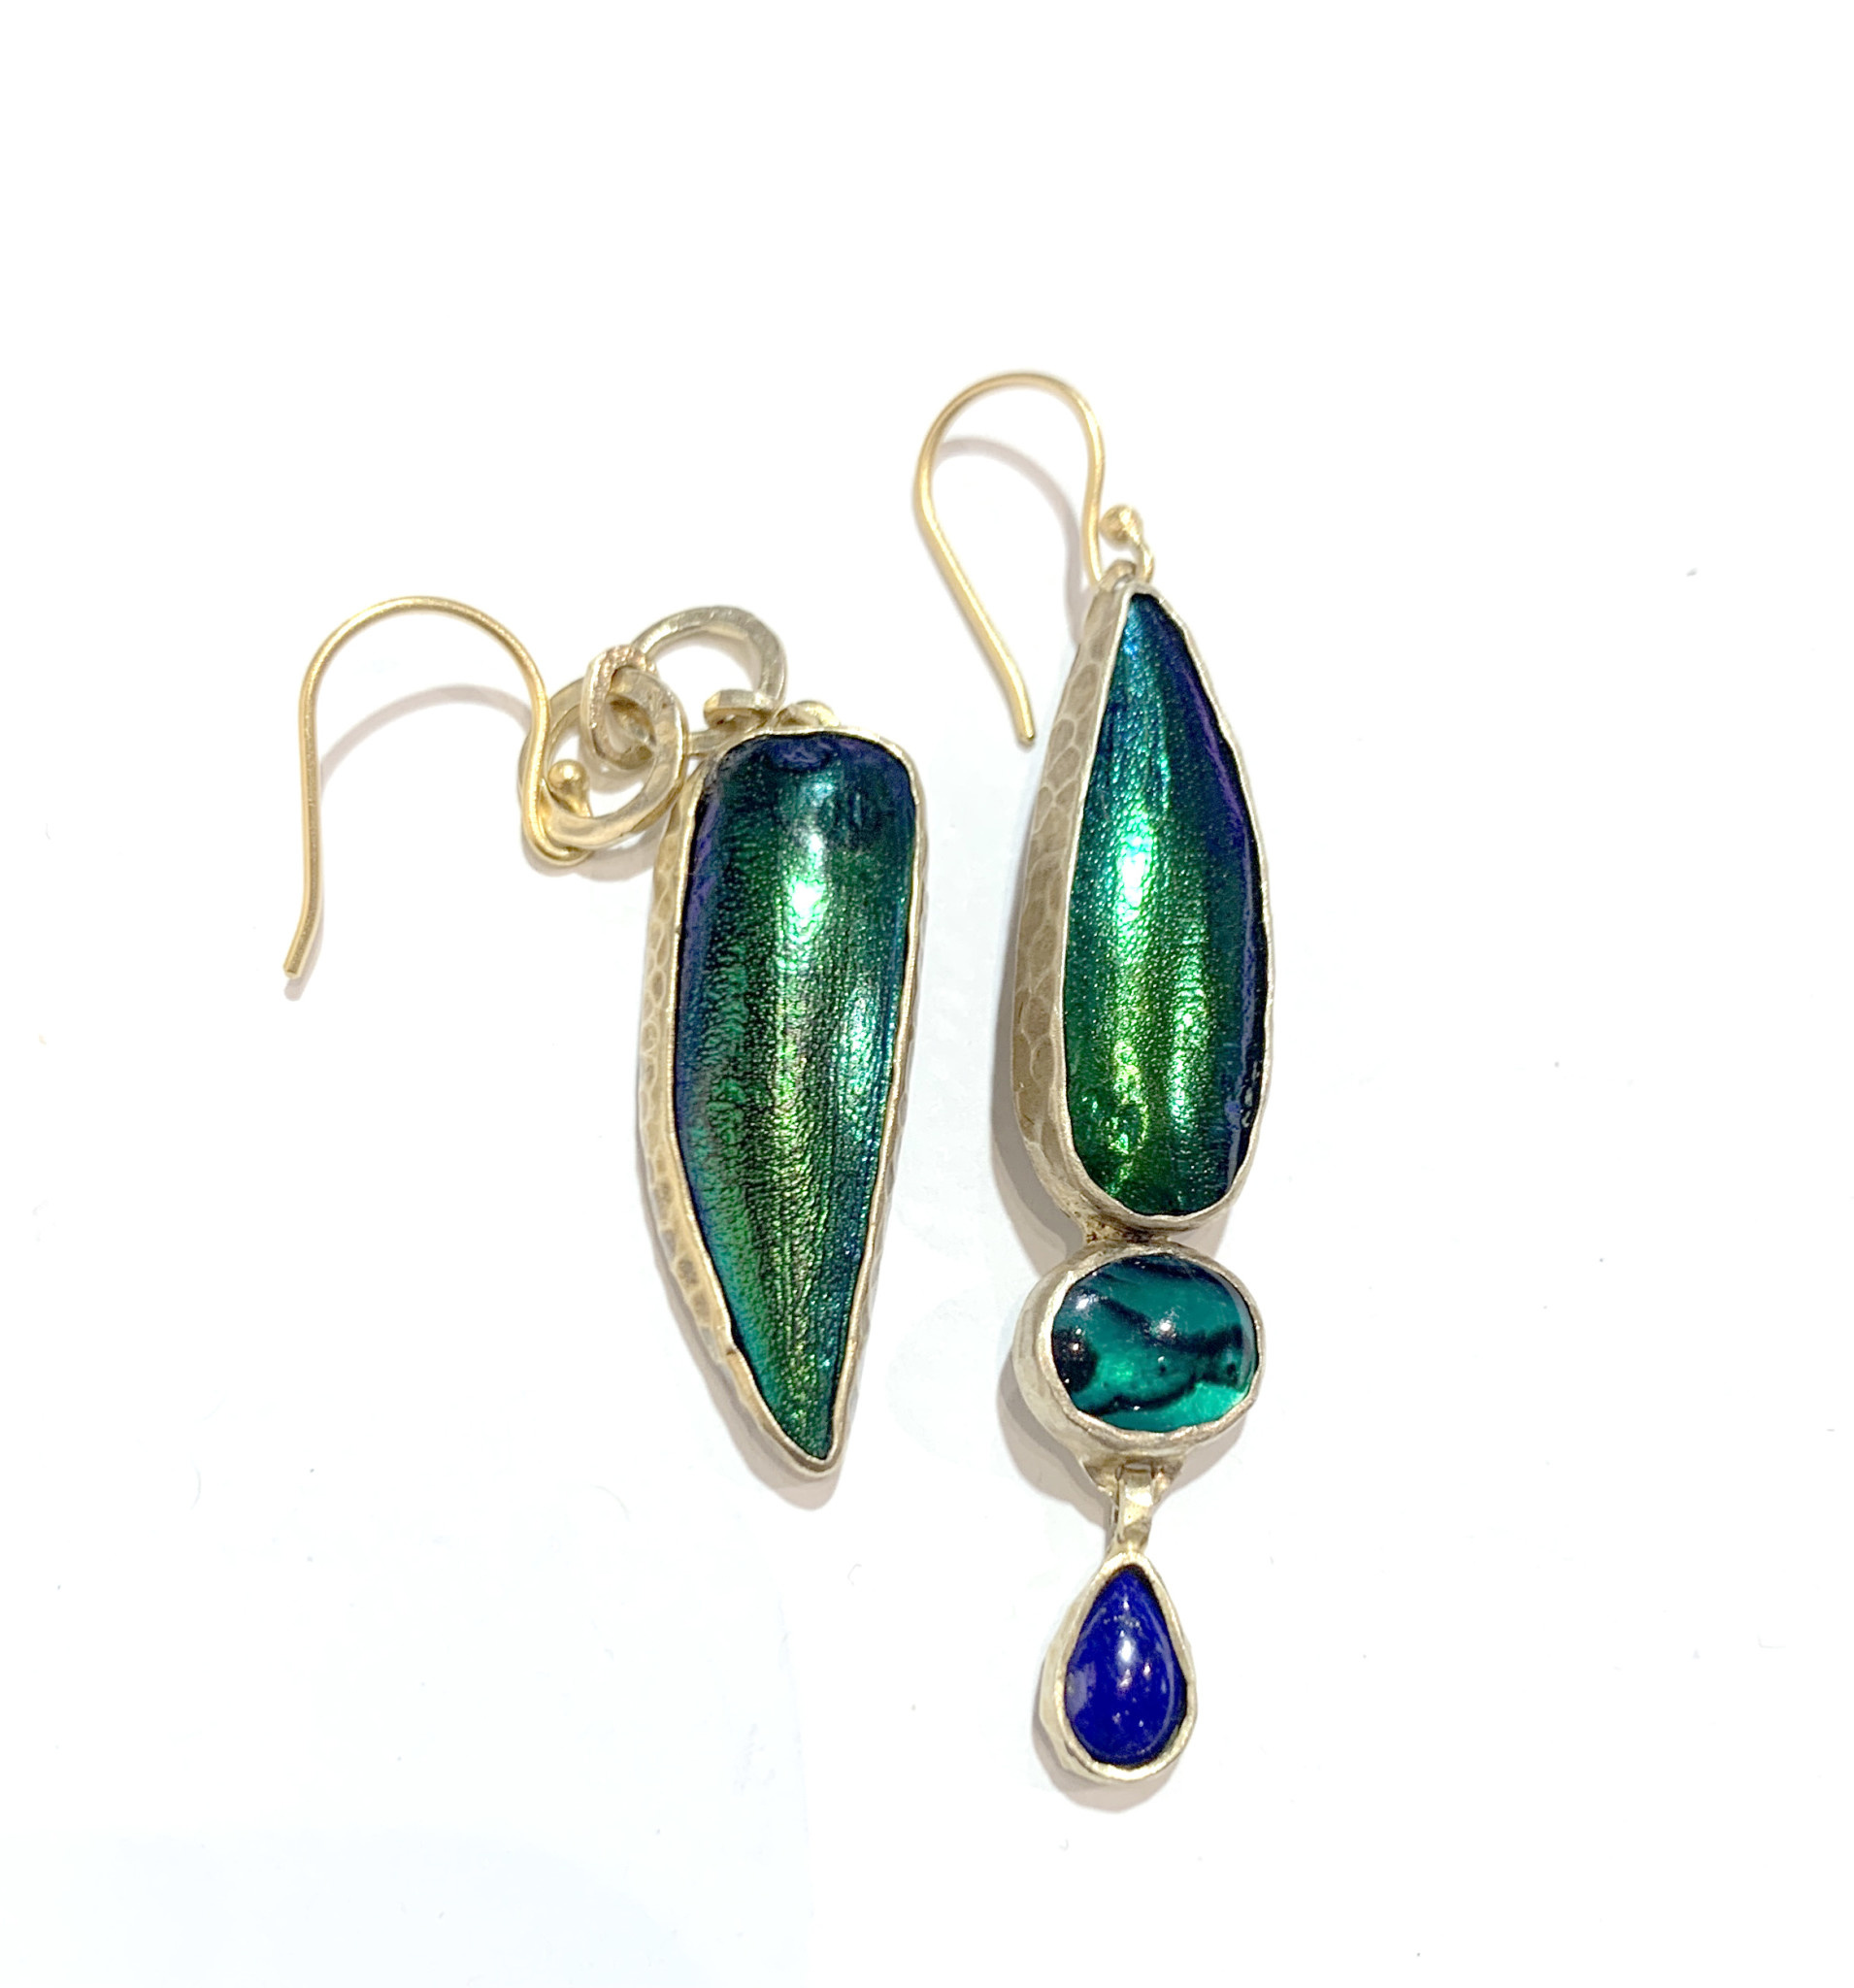 HBJ  Mix matched Thai Jewel Beetle wing, lapis and green paua earrings